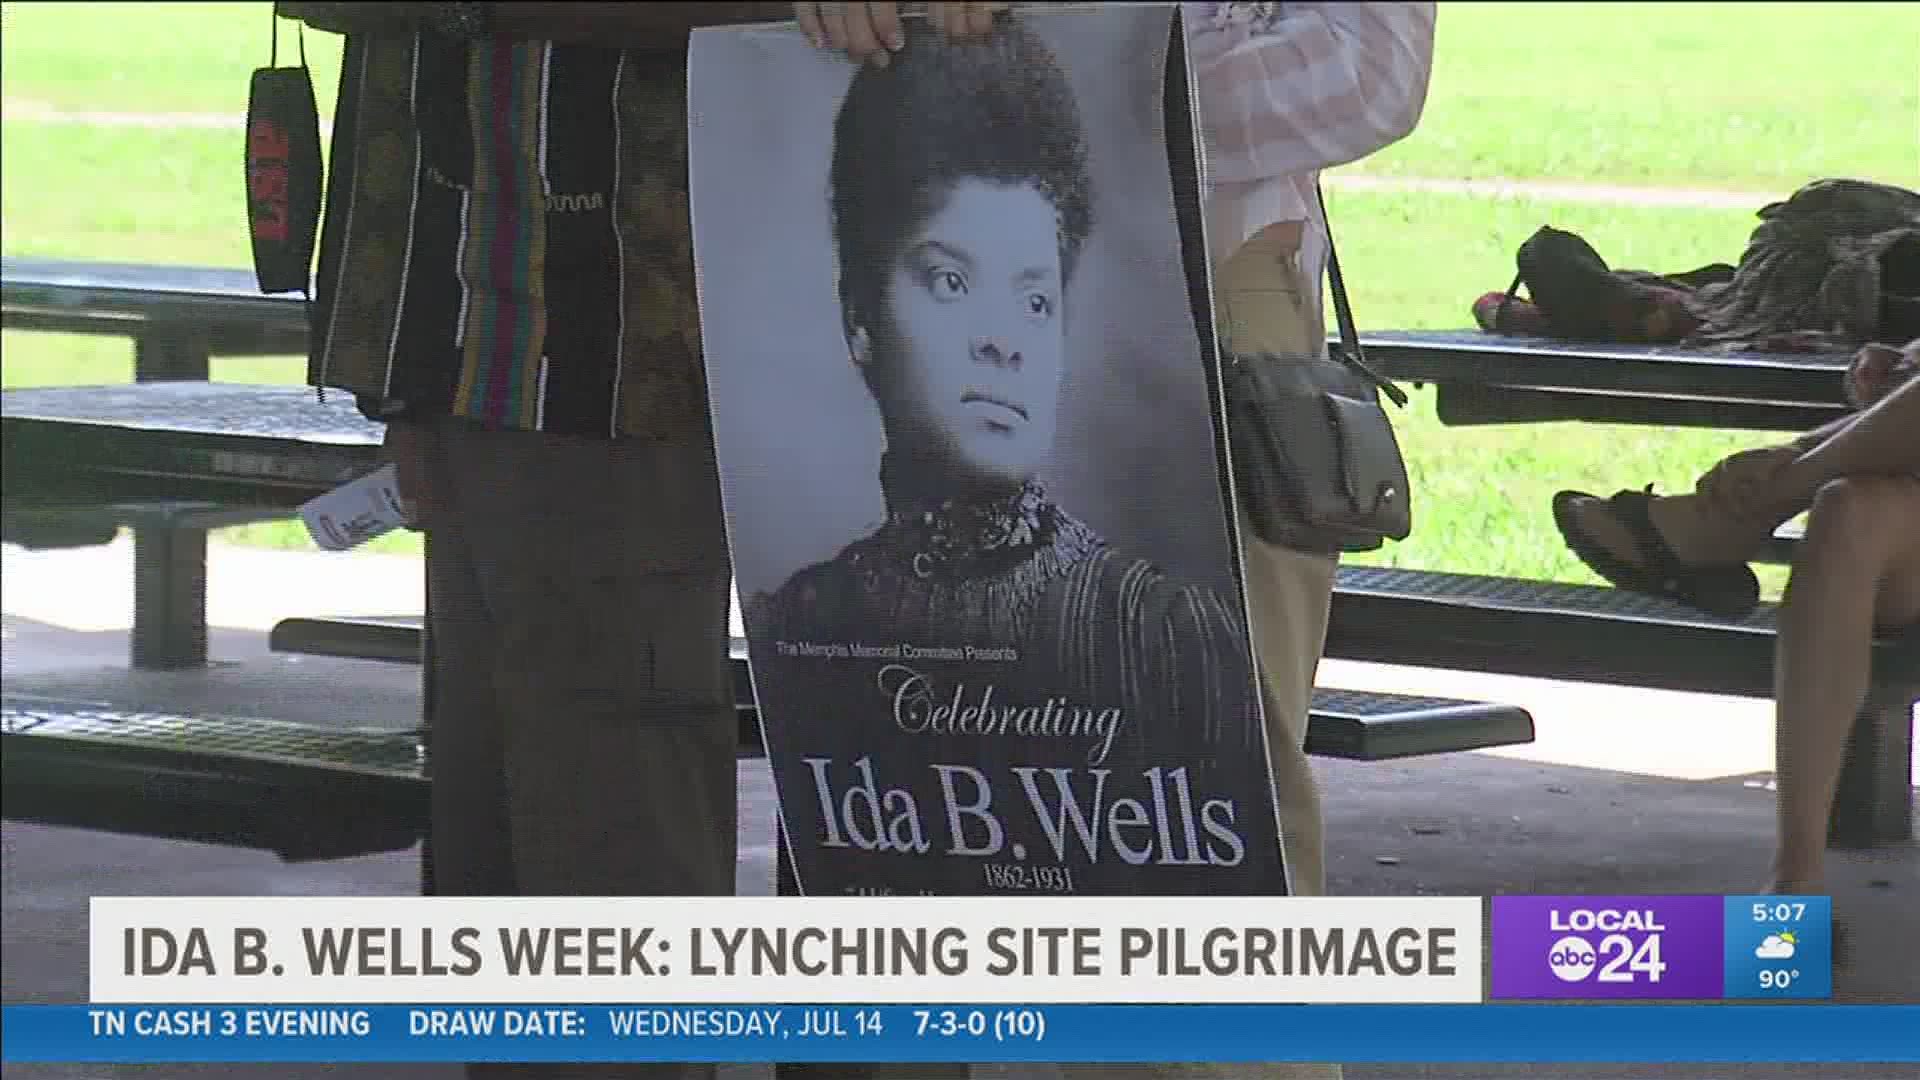 Thomas Moss, Calvin McDowell, and Will Stewart's deaths were documented by their friend and journalist, Ida B. Wells.